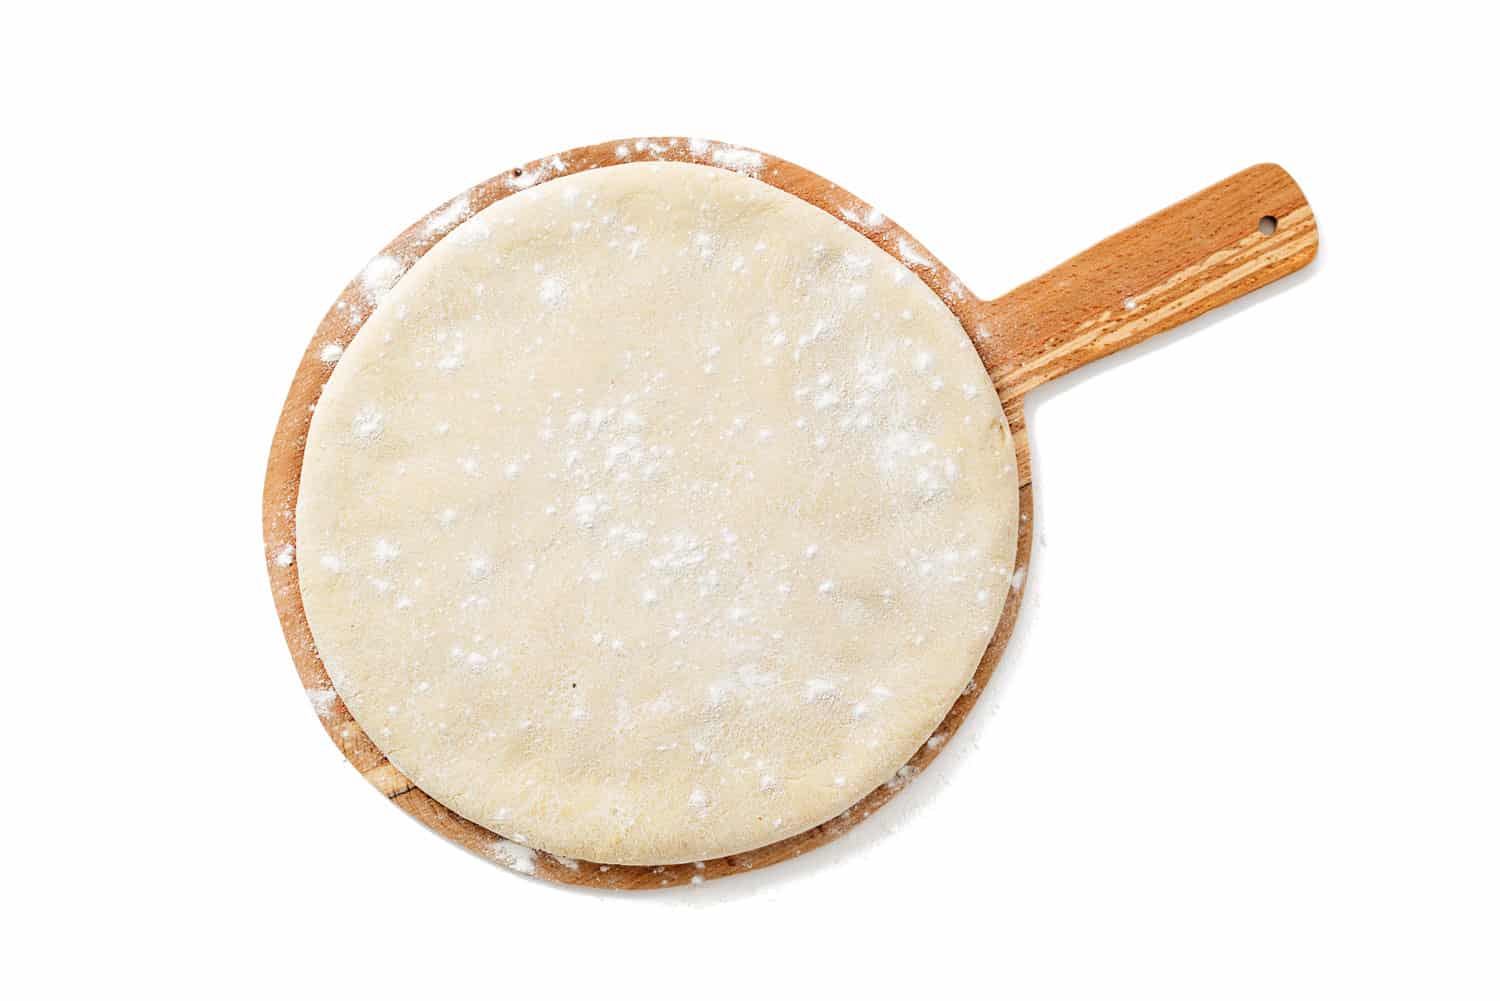 Fresh raw dough for pizza or bread baking on wooden cutting board isolated on white background